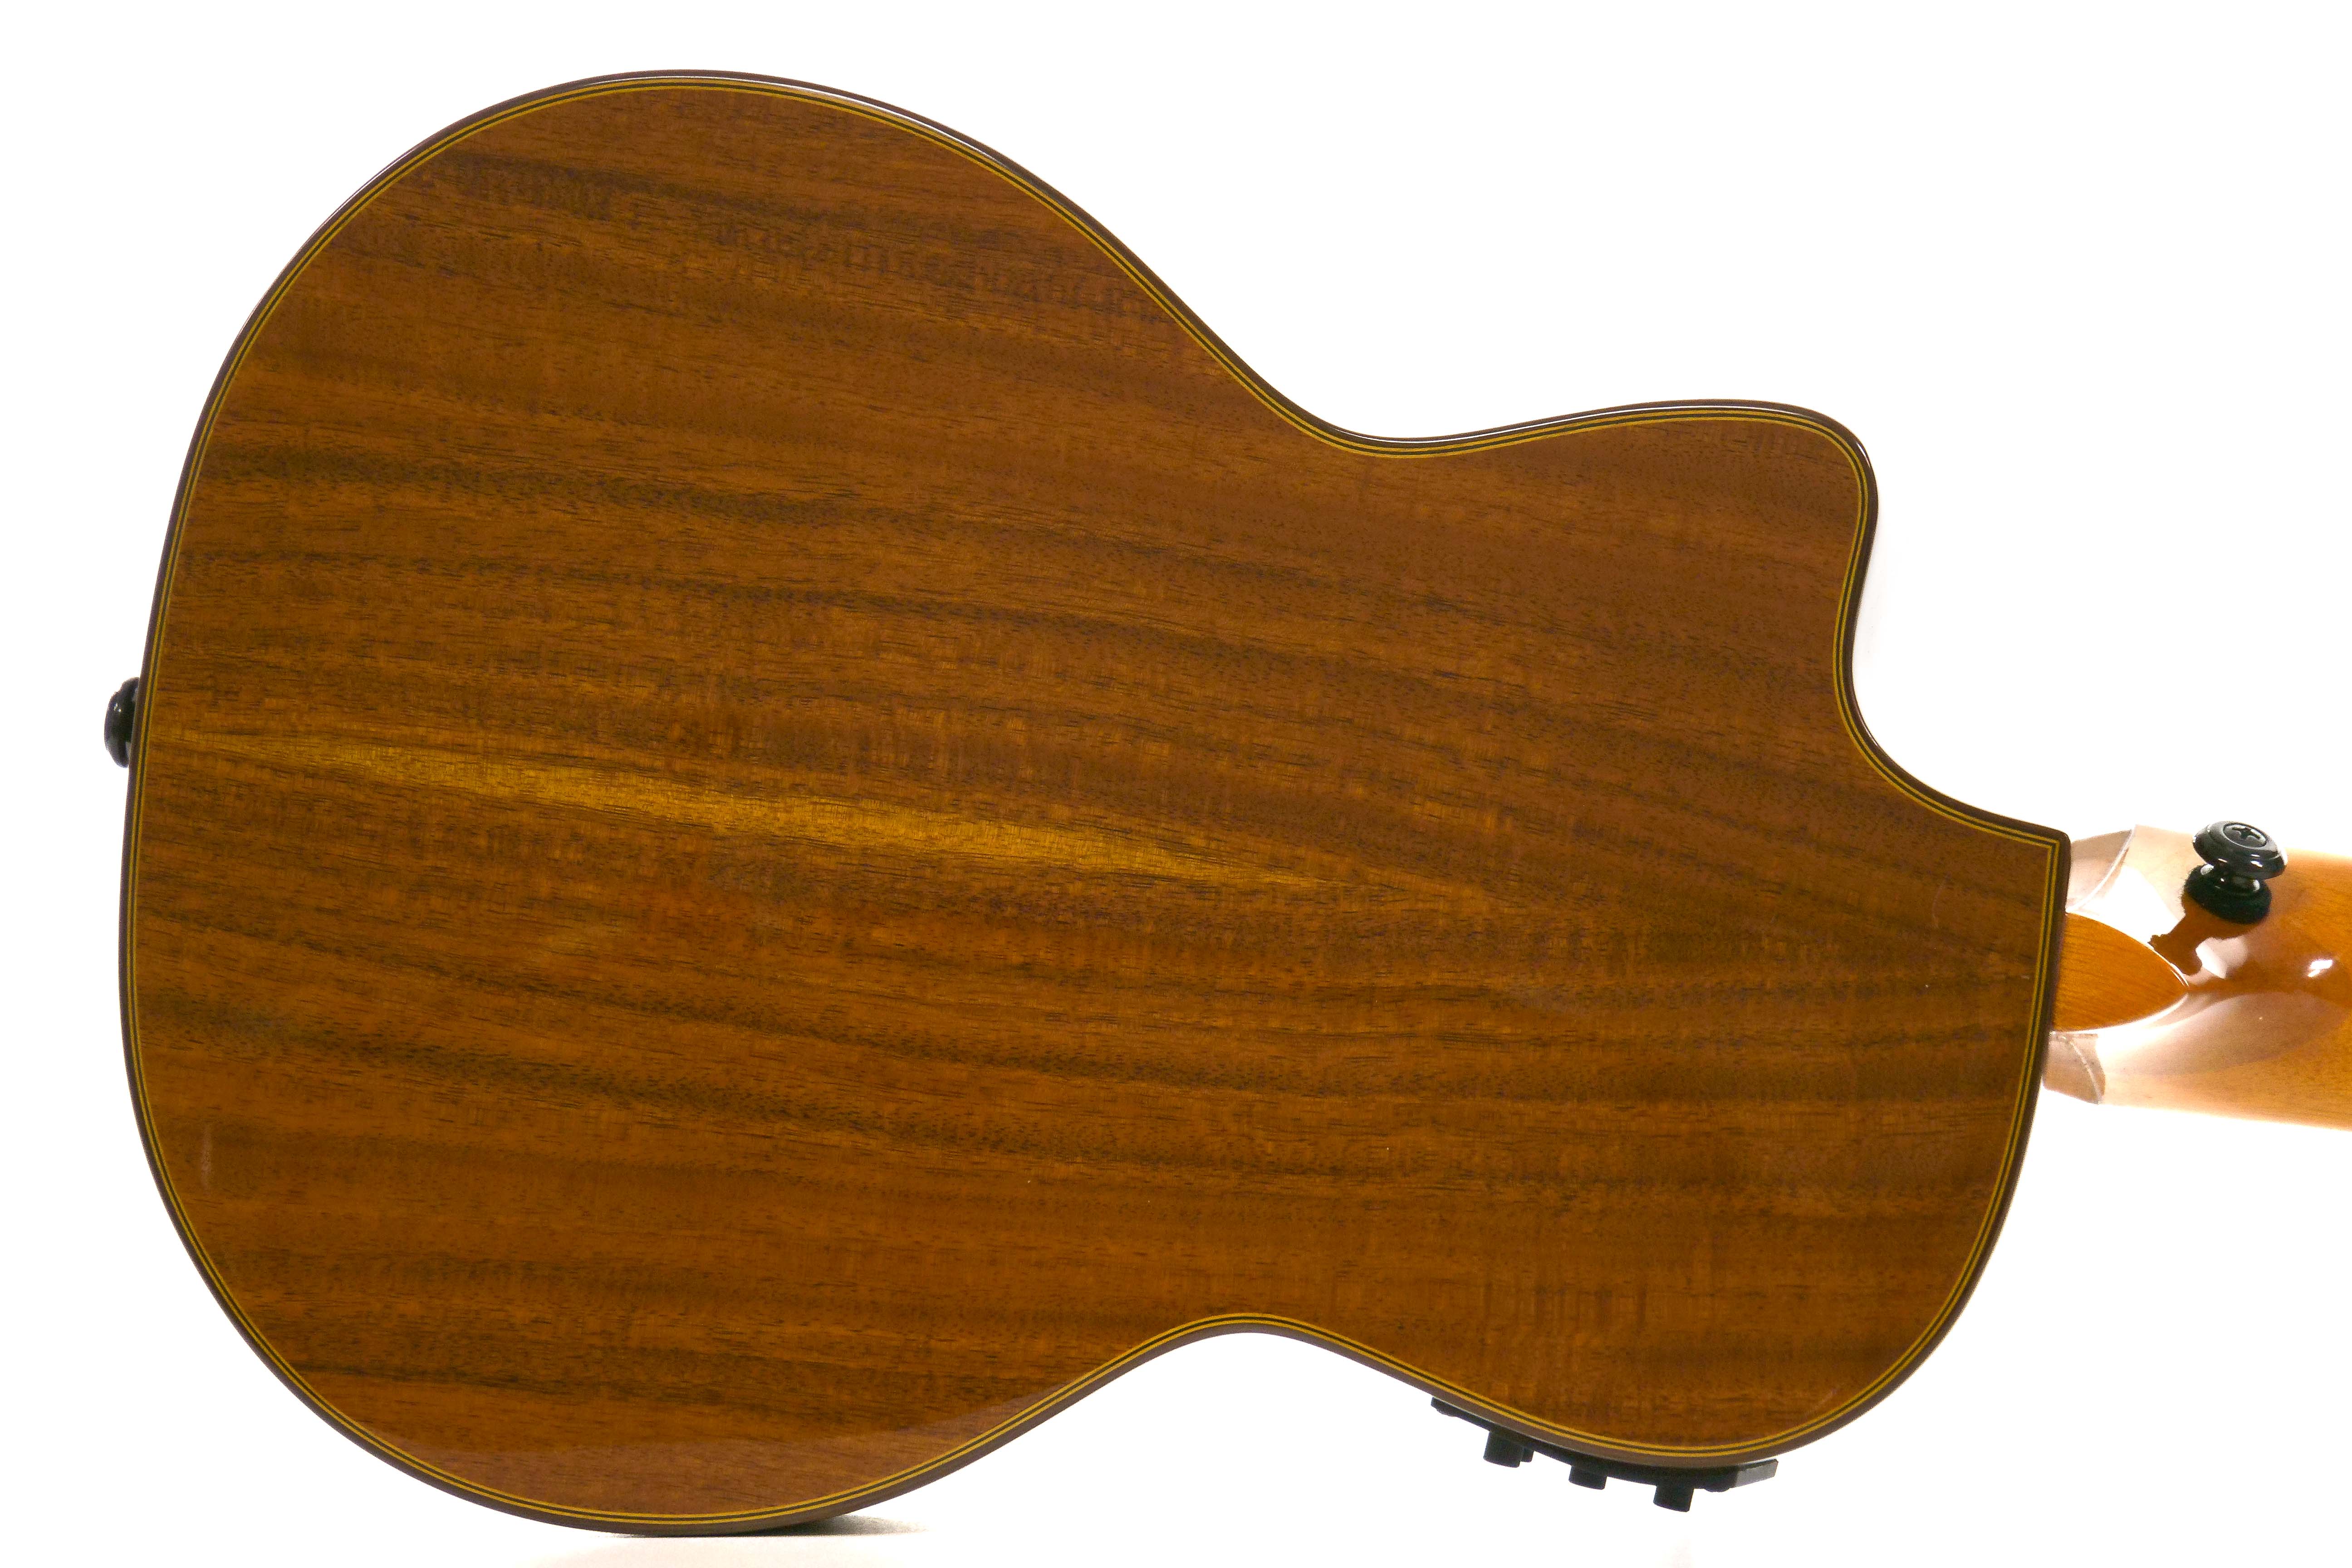 [PRE-OWNED] Ohana TK-250GCE Limited Edition Tenor Ukulele Solid Spruce Top/Acacia with EQ "MARCI"